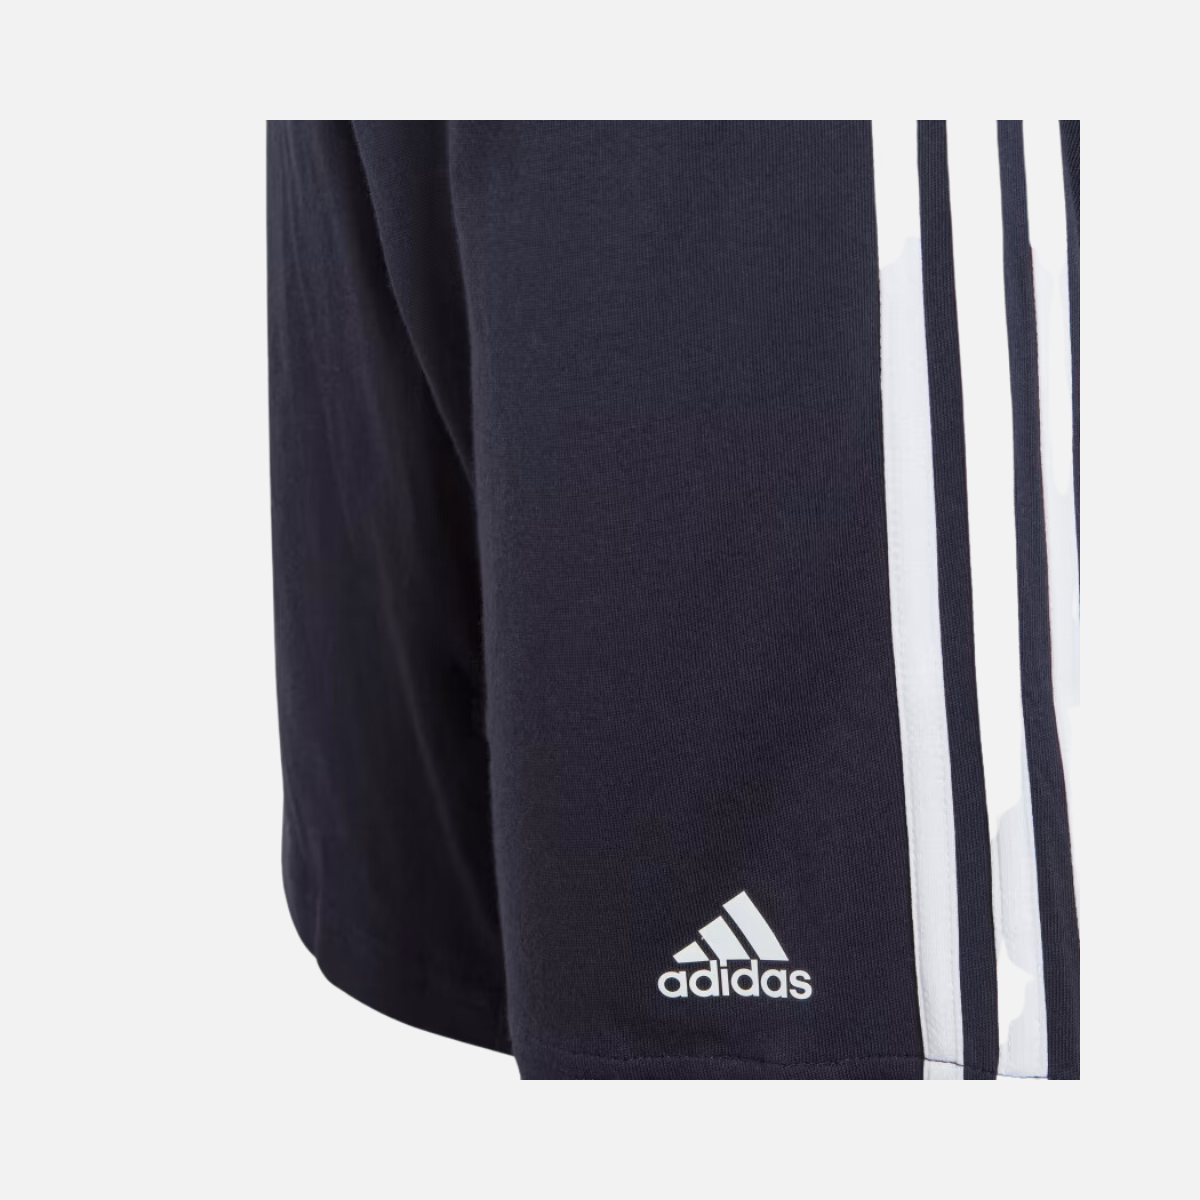 Adidas Essential 3 Stripes Shorts And T-shirt Kids Set (3-8 Years) -Semi Lucid Blue